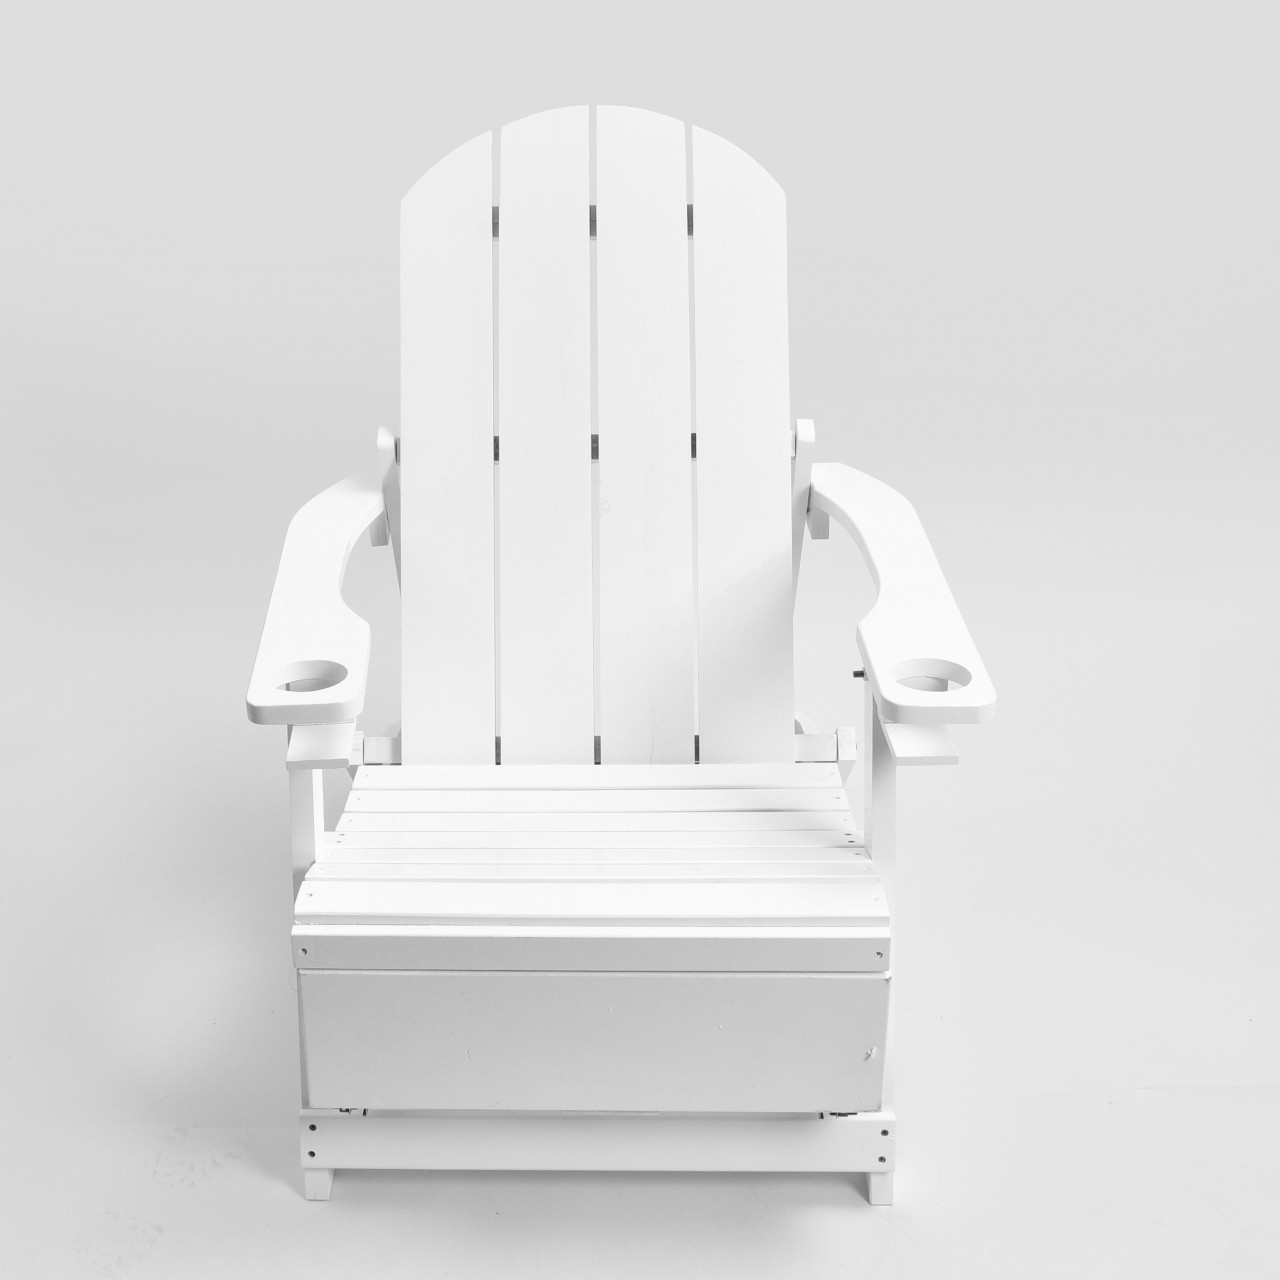 Adirondack Chair with Cooler, White, Tables / Chairs / Displays, Products